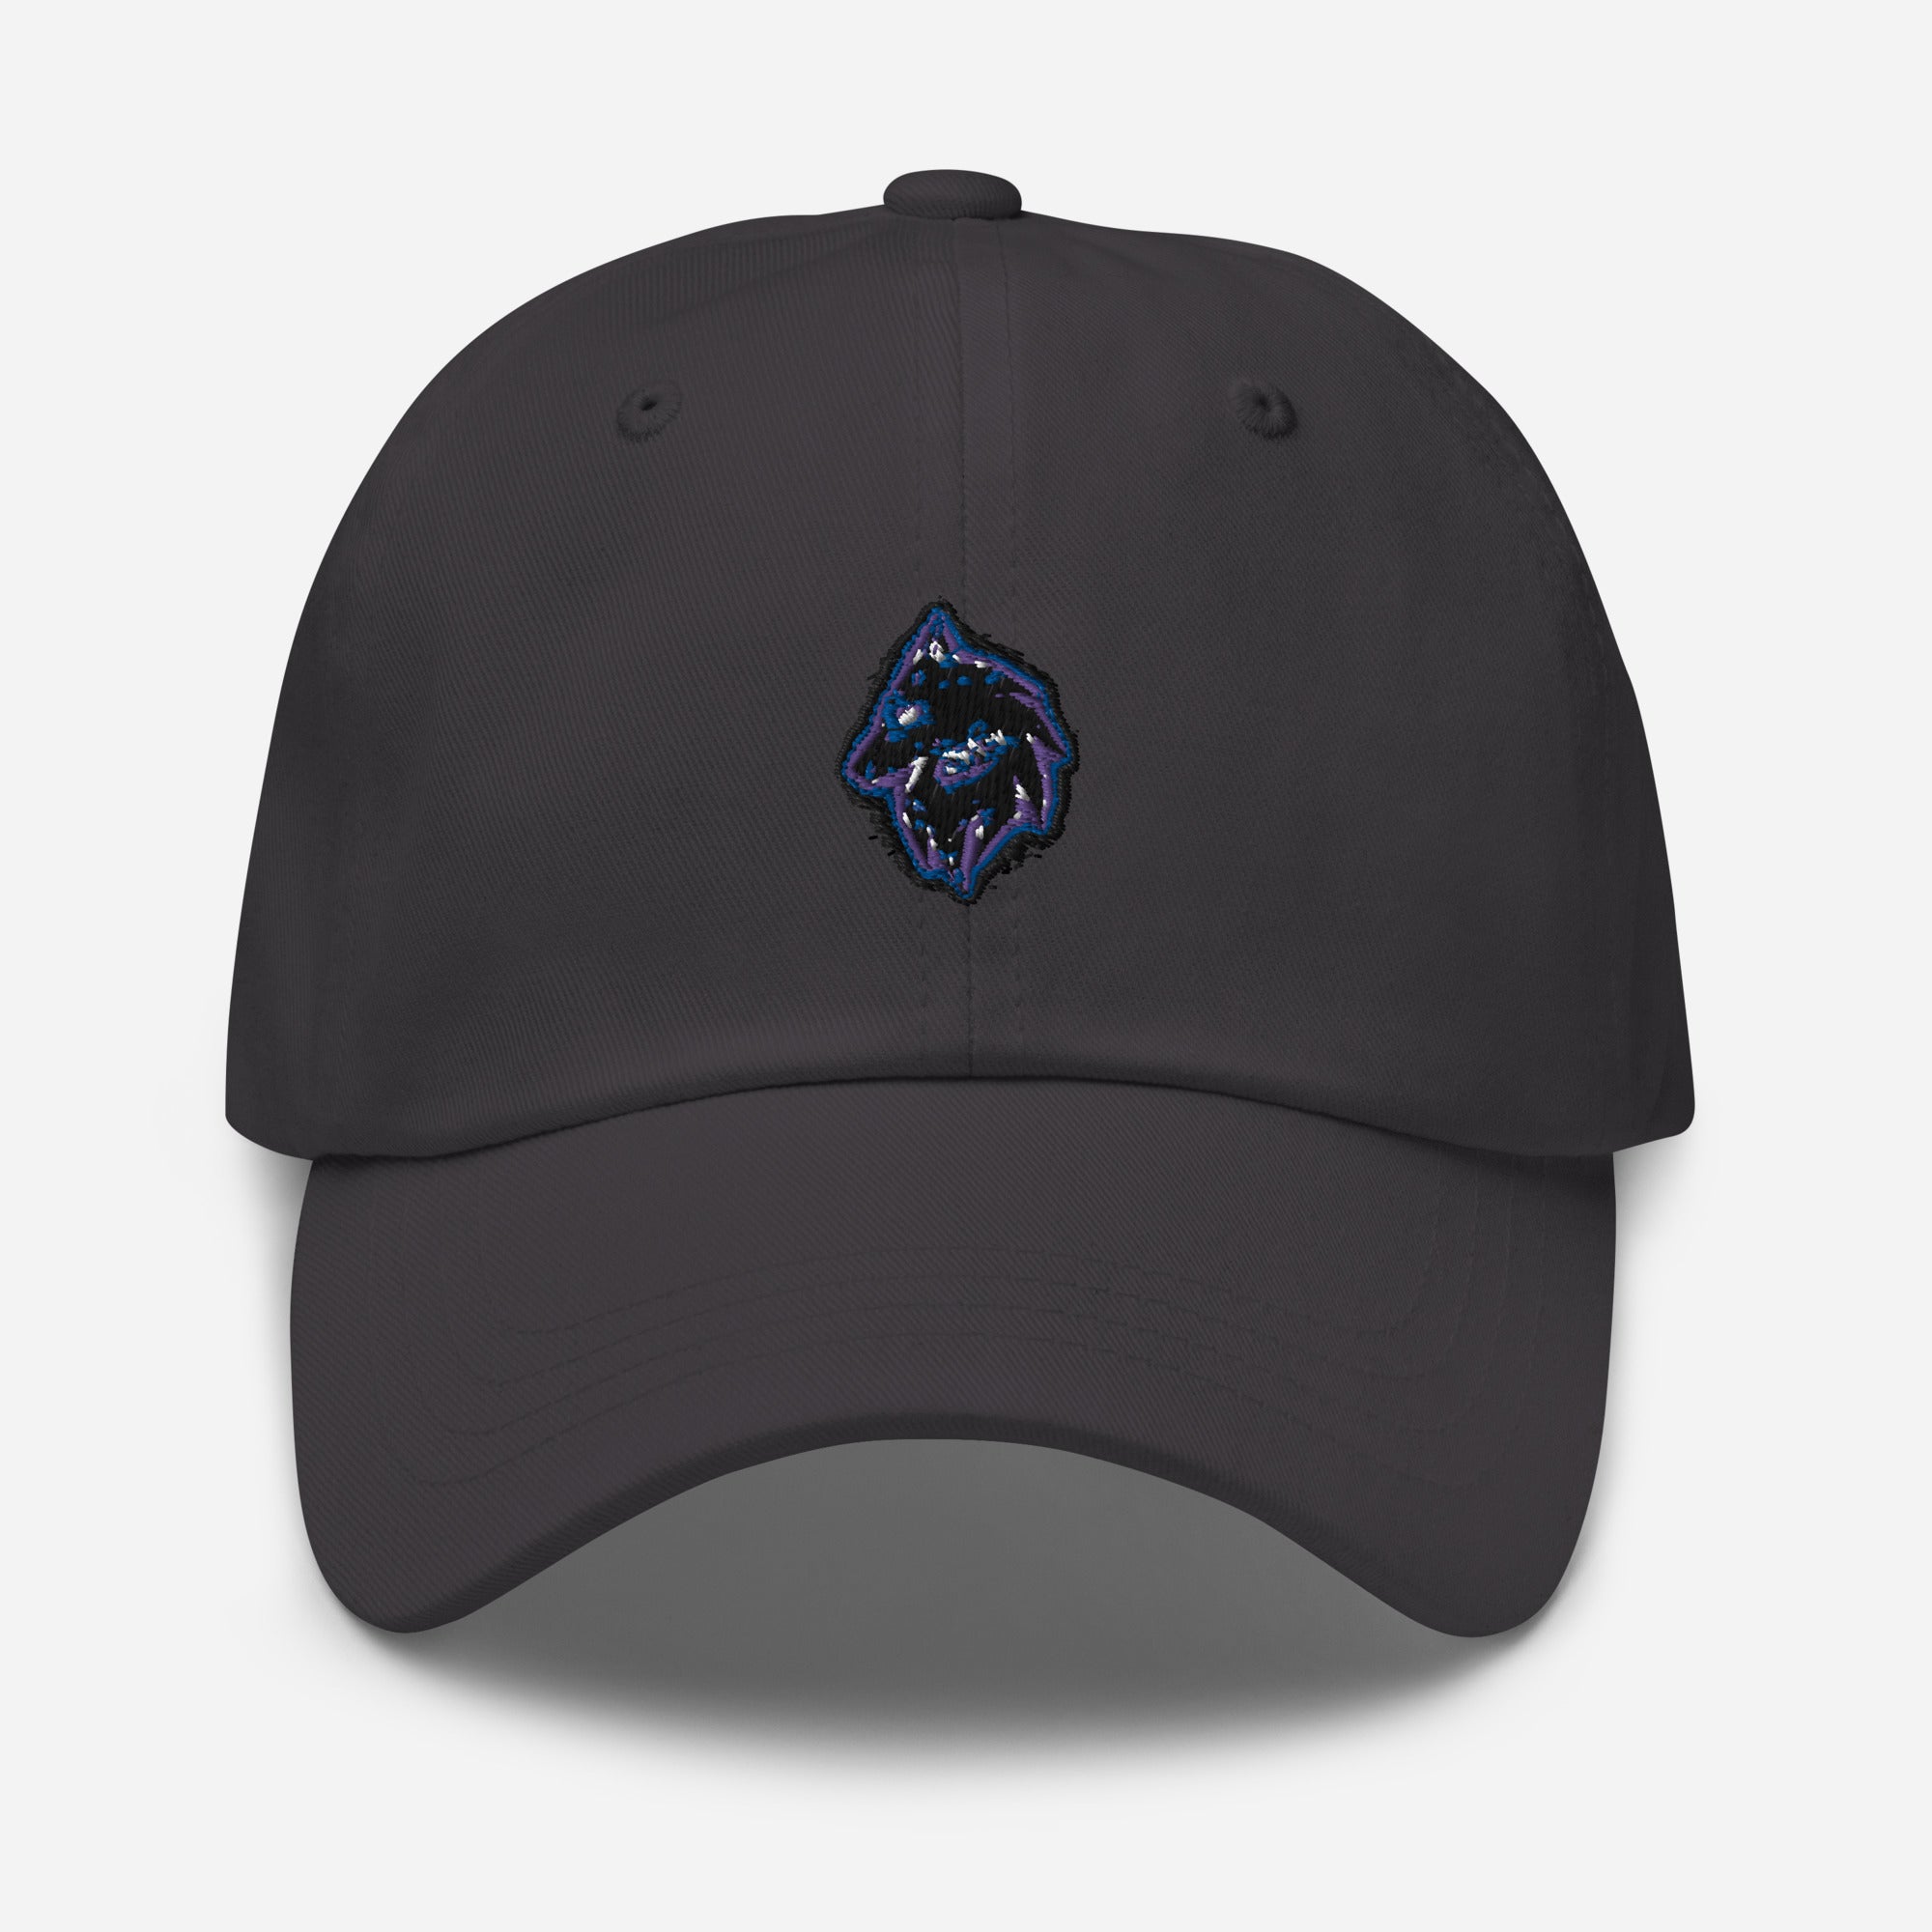 shc Embroidered Dad hat